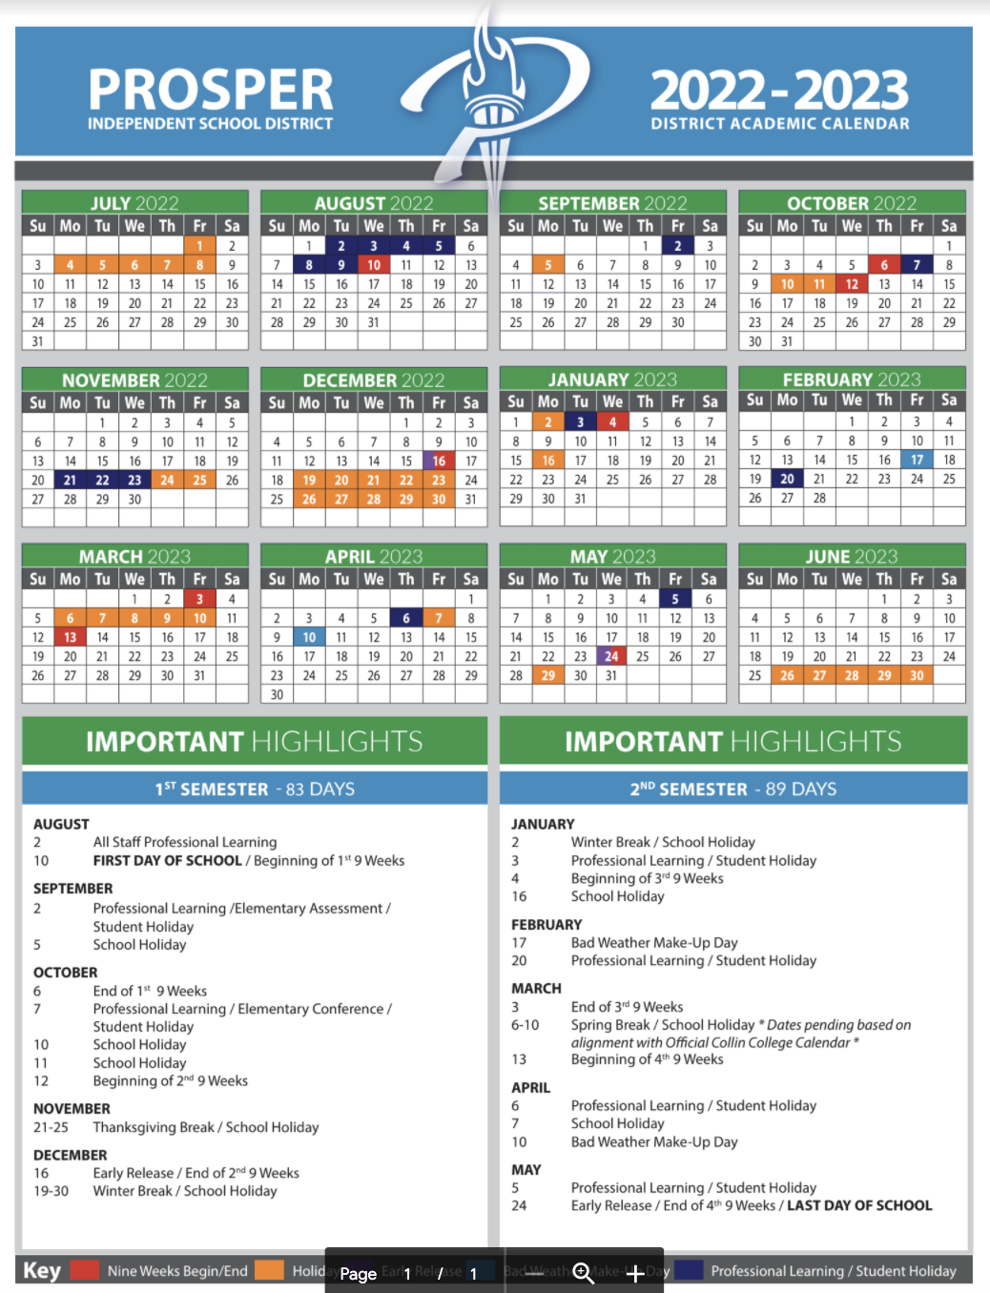 Here are Prosper ISD's school calendars for the 2022-2023 and the 2023-2024 school years